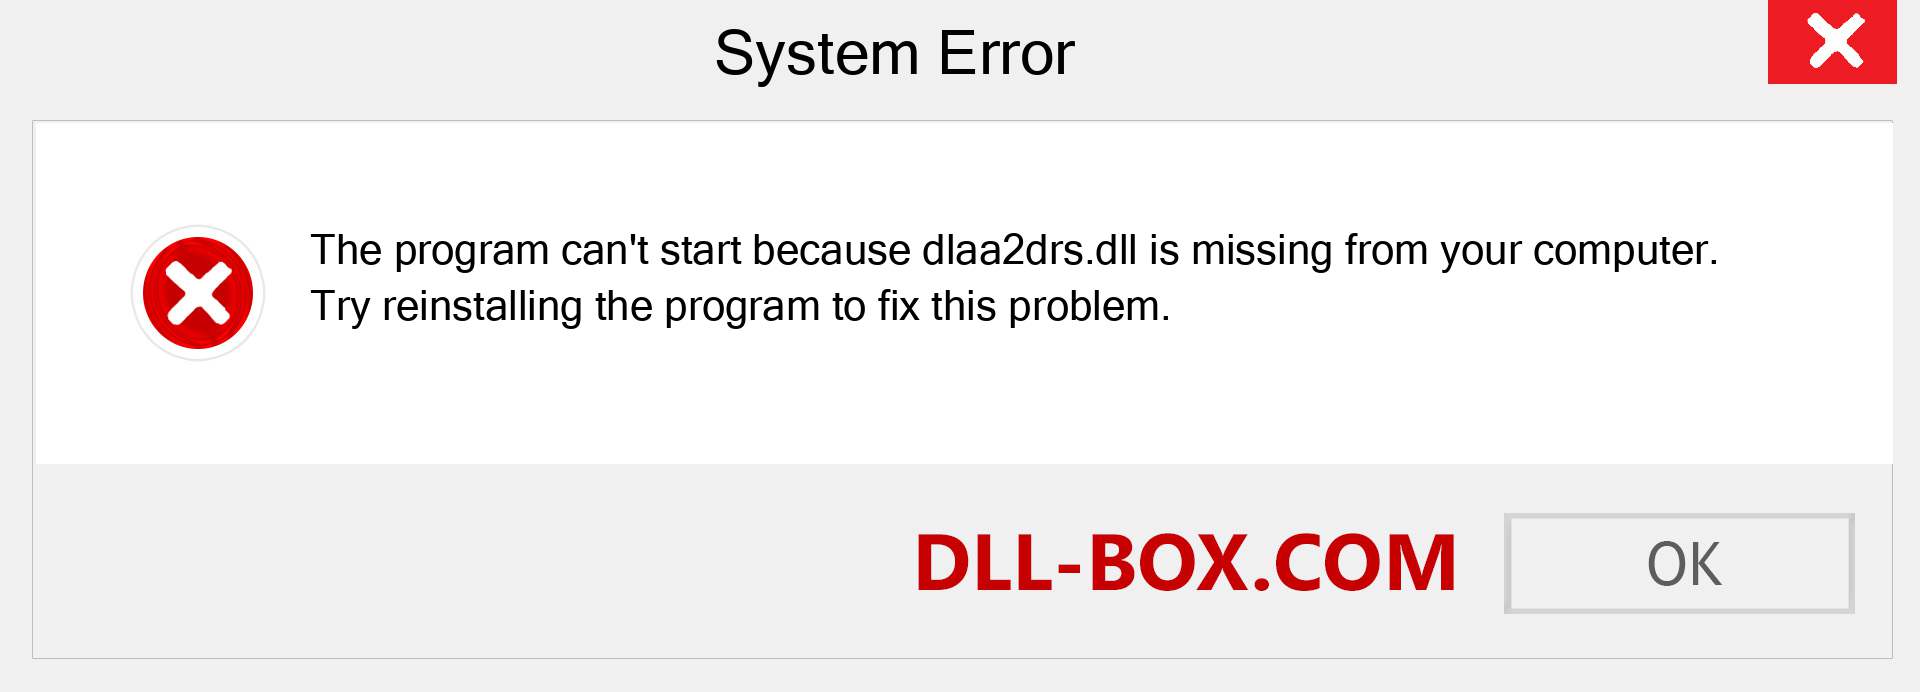  dlaa2drs.dll file is missing?. Download for Windows 7, 8, 10 - Fix  dlaa2drs dll Missing Error on Windows, photos, images